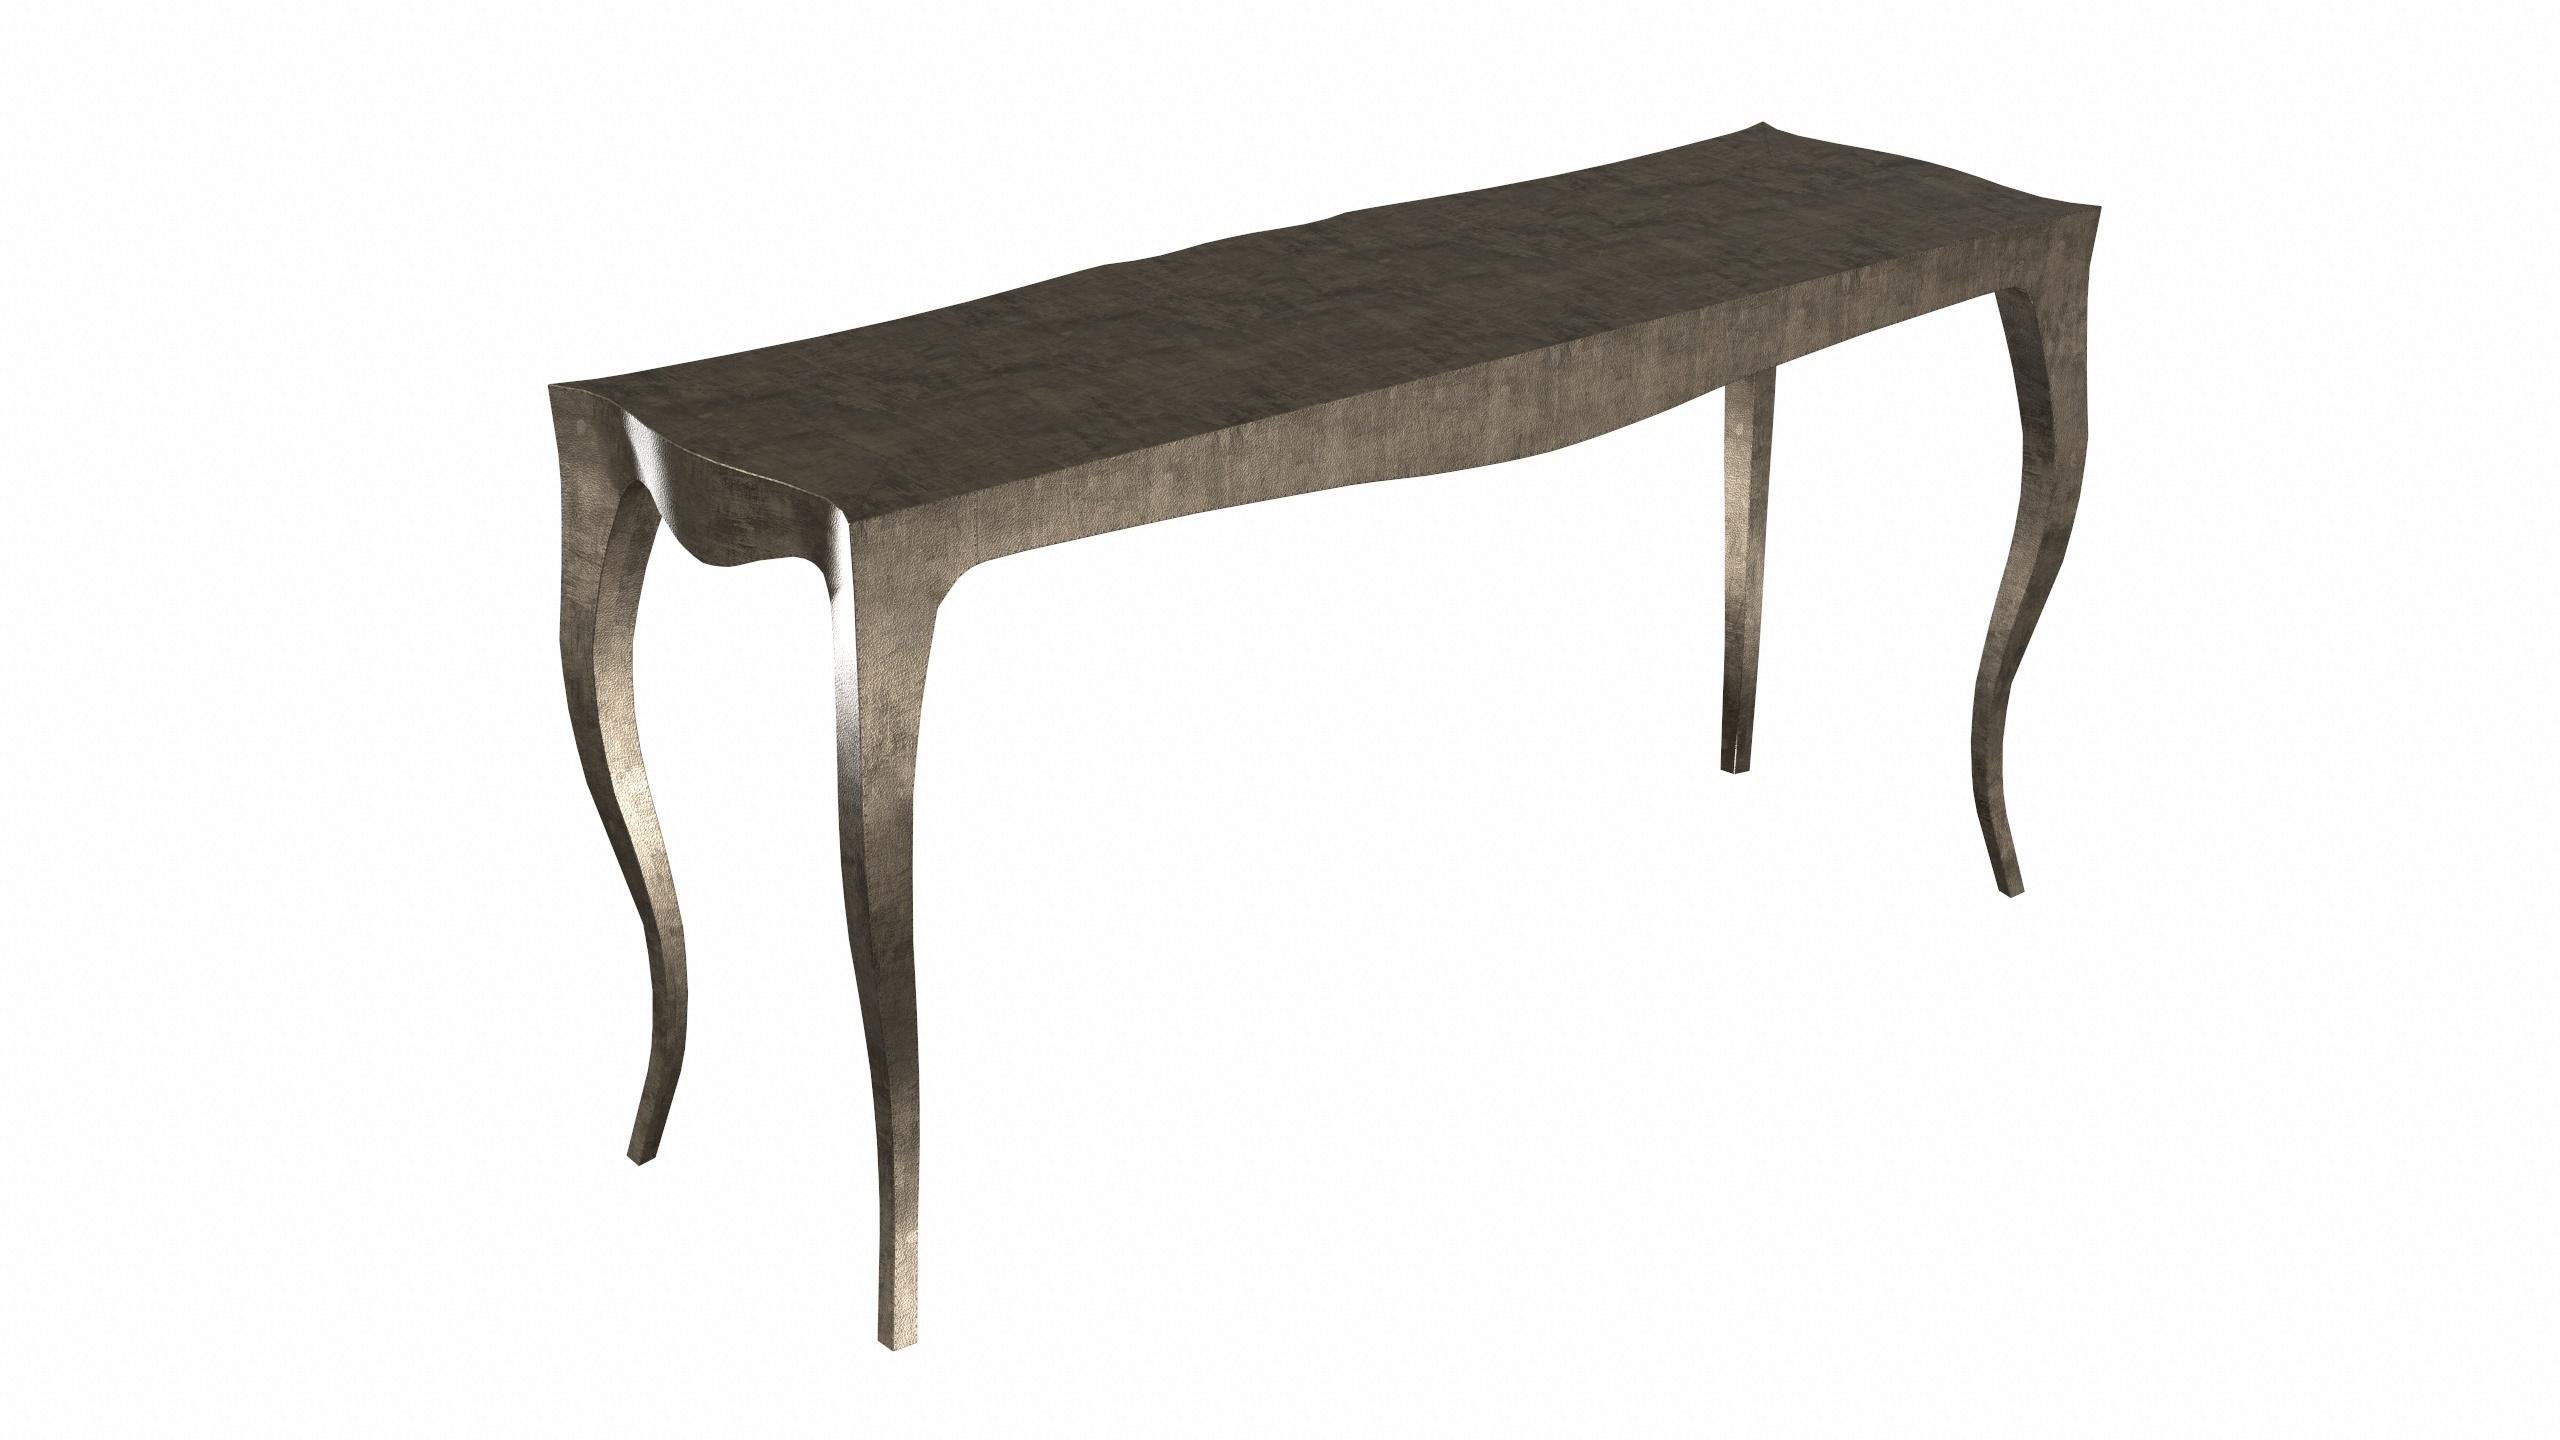 Other Louise Console Art Deco Center Tables Fine Hammered Antique Bronze by P. Mathieu For Sale